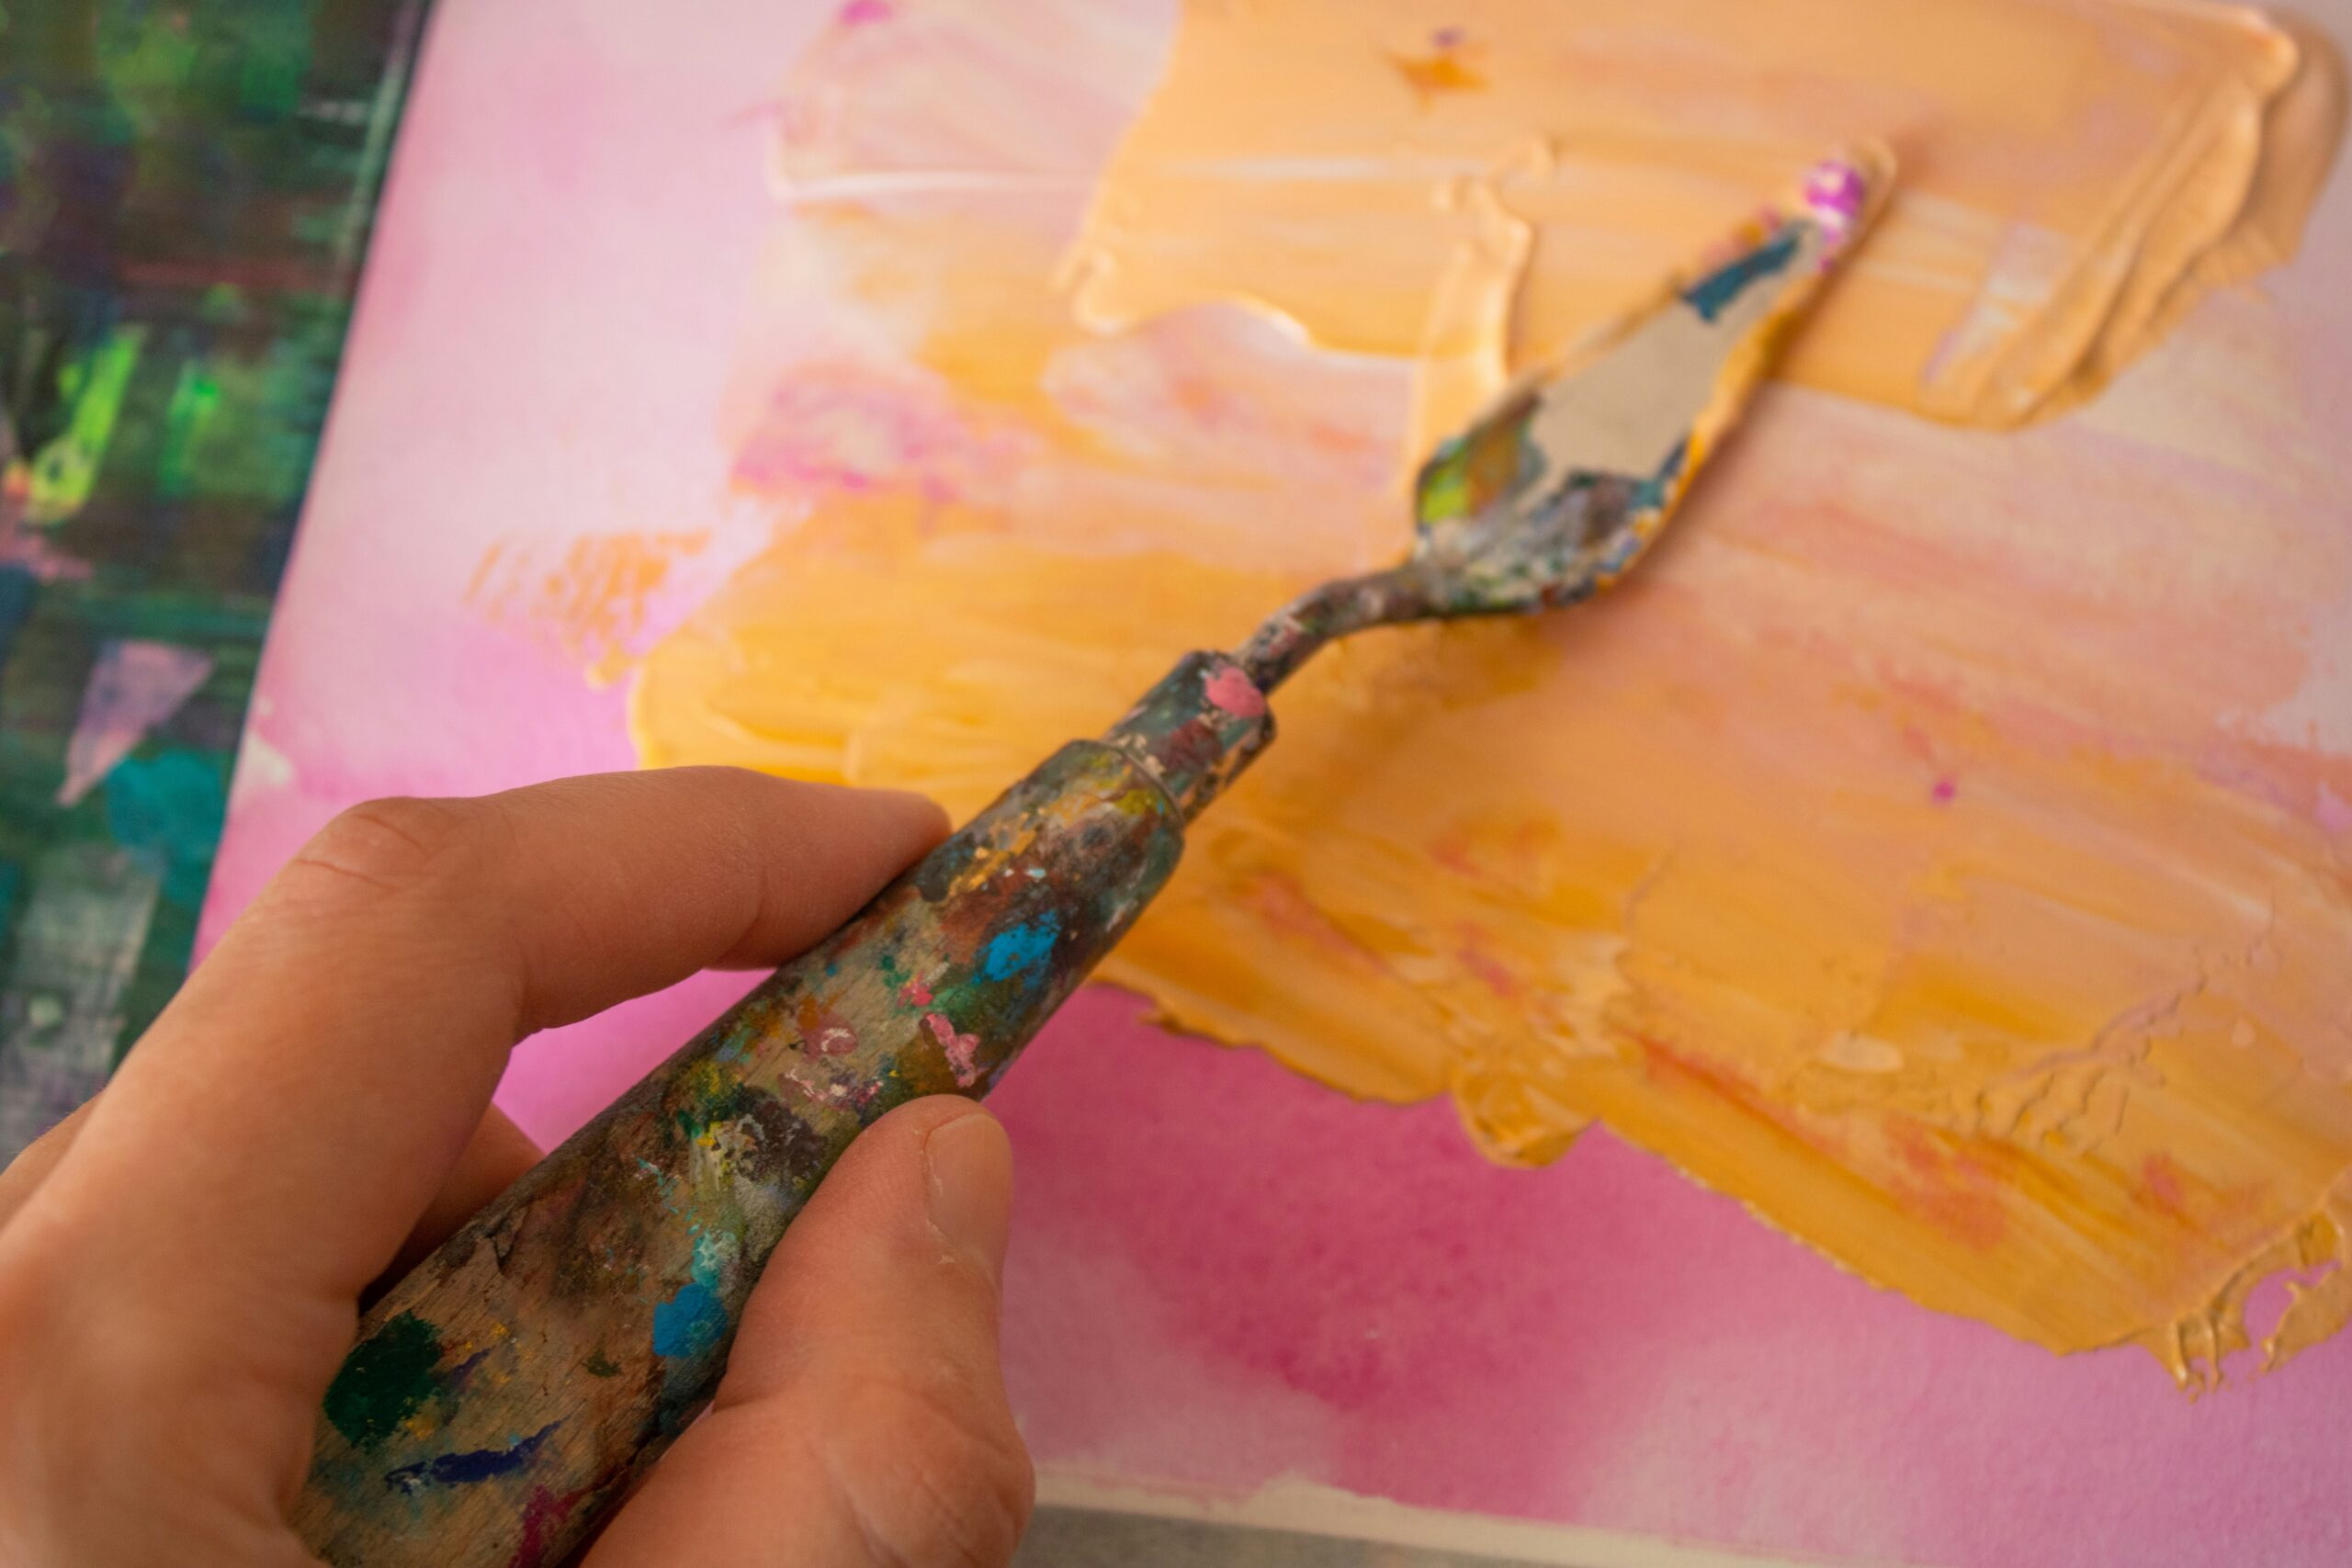 Close-up of a left hand hoding an artist's palette knife on a canvas with pink and orange paint